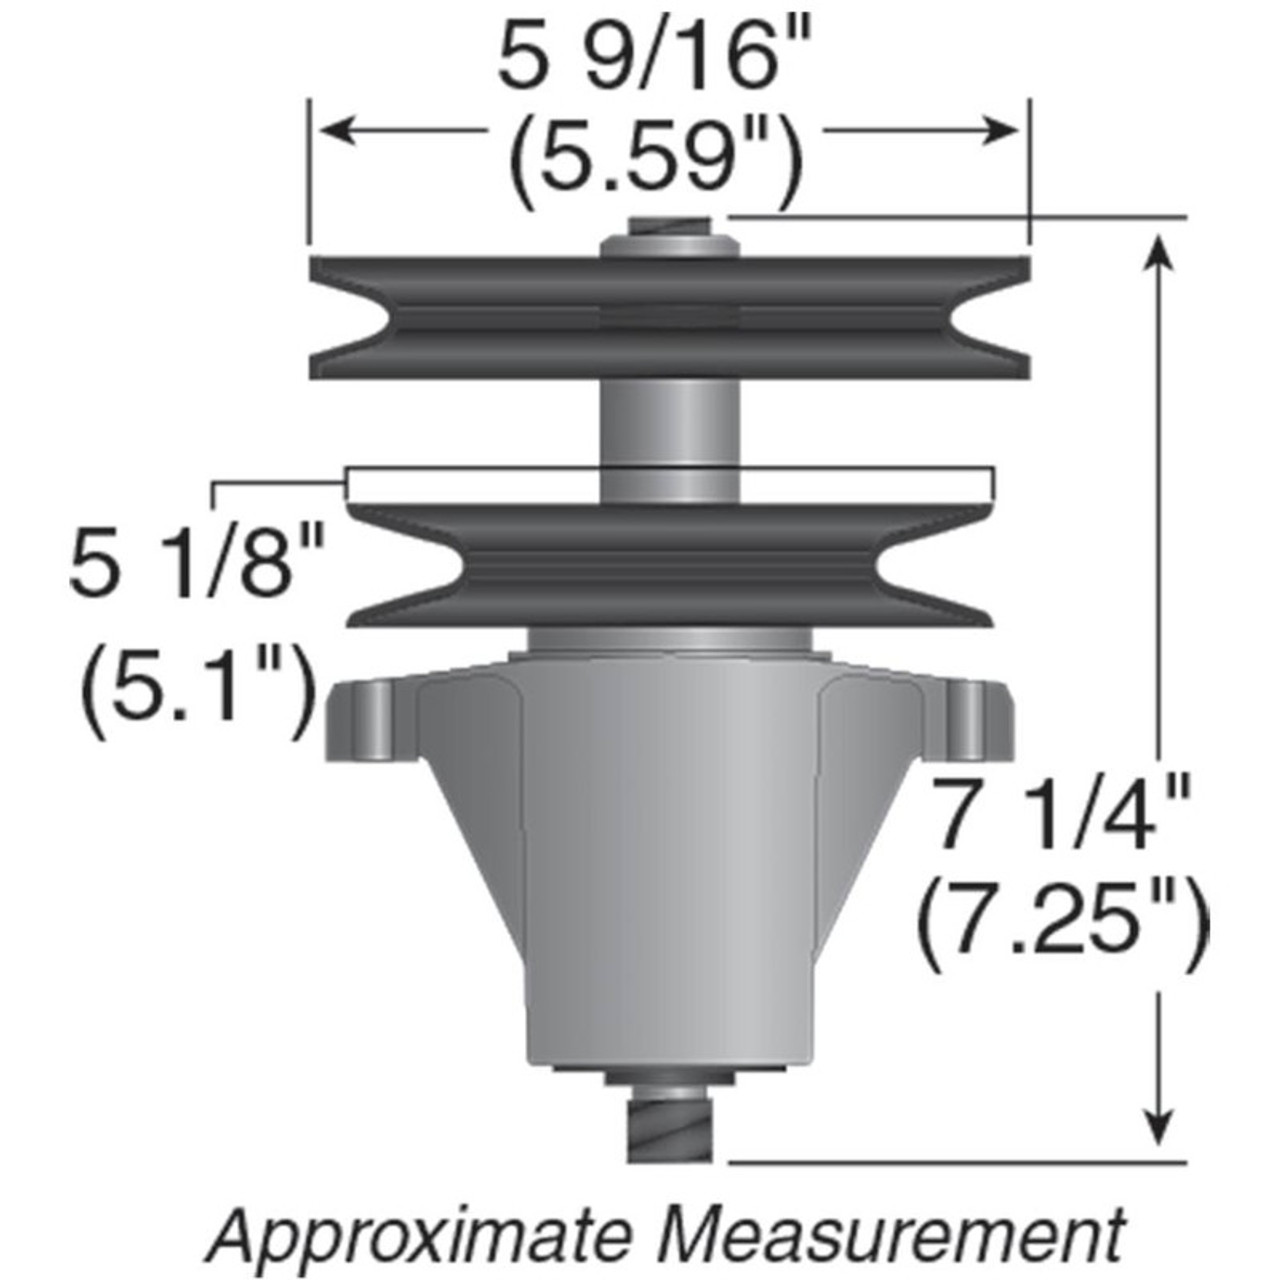 Deck Spindle for MTD LT5, RT99, 46" Cut 618-04134, 618-04134A, 618-04134B, 618-04134C, 618-04134D, 918-04134, 918-04134A, 918-04134B, 918-04134C, 918-04134D, Includes double pulley, mounting screws, grease fittting